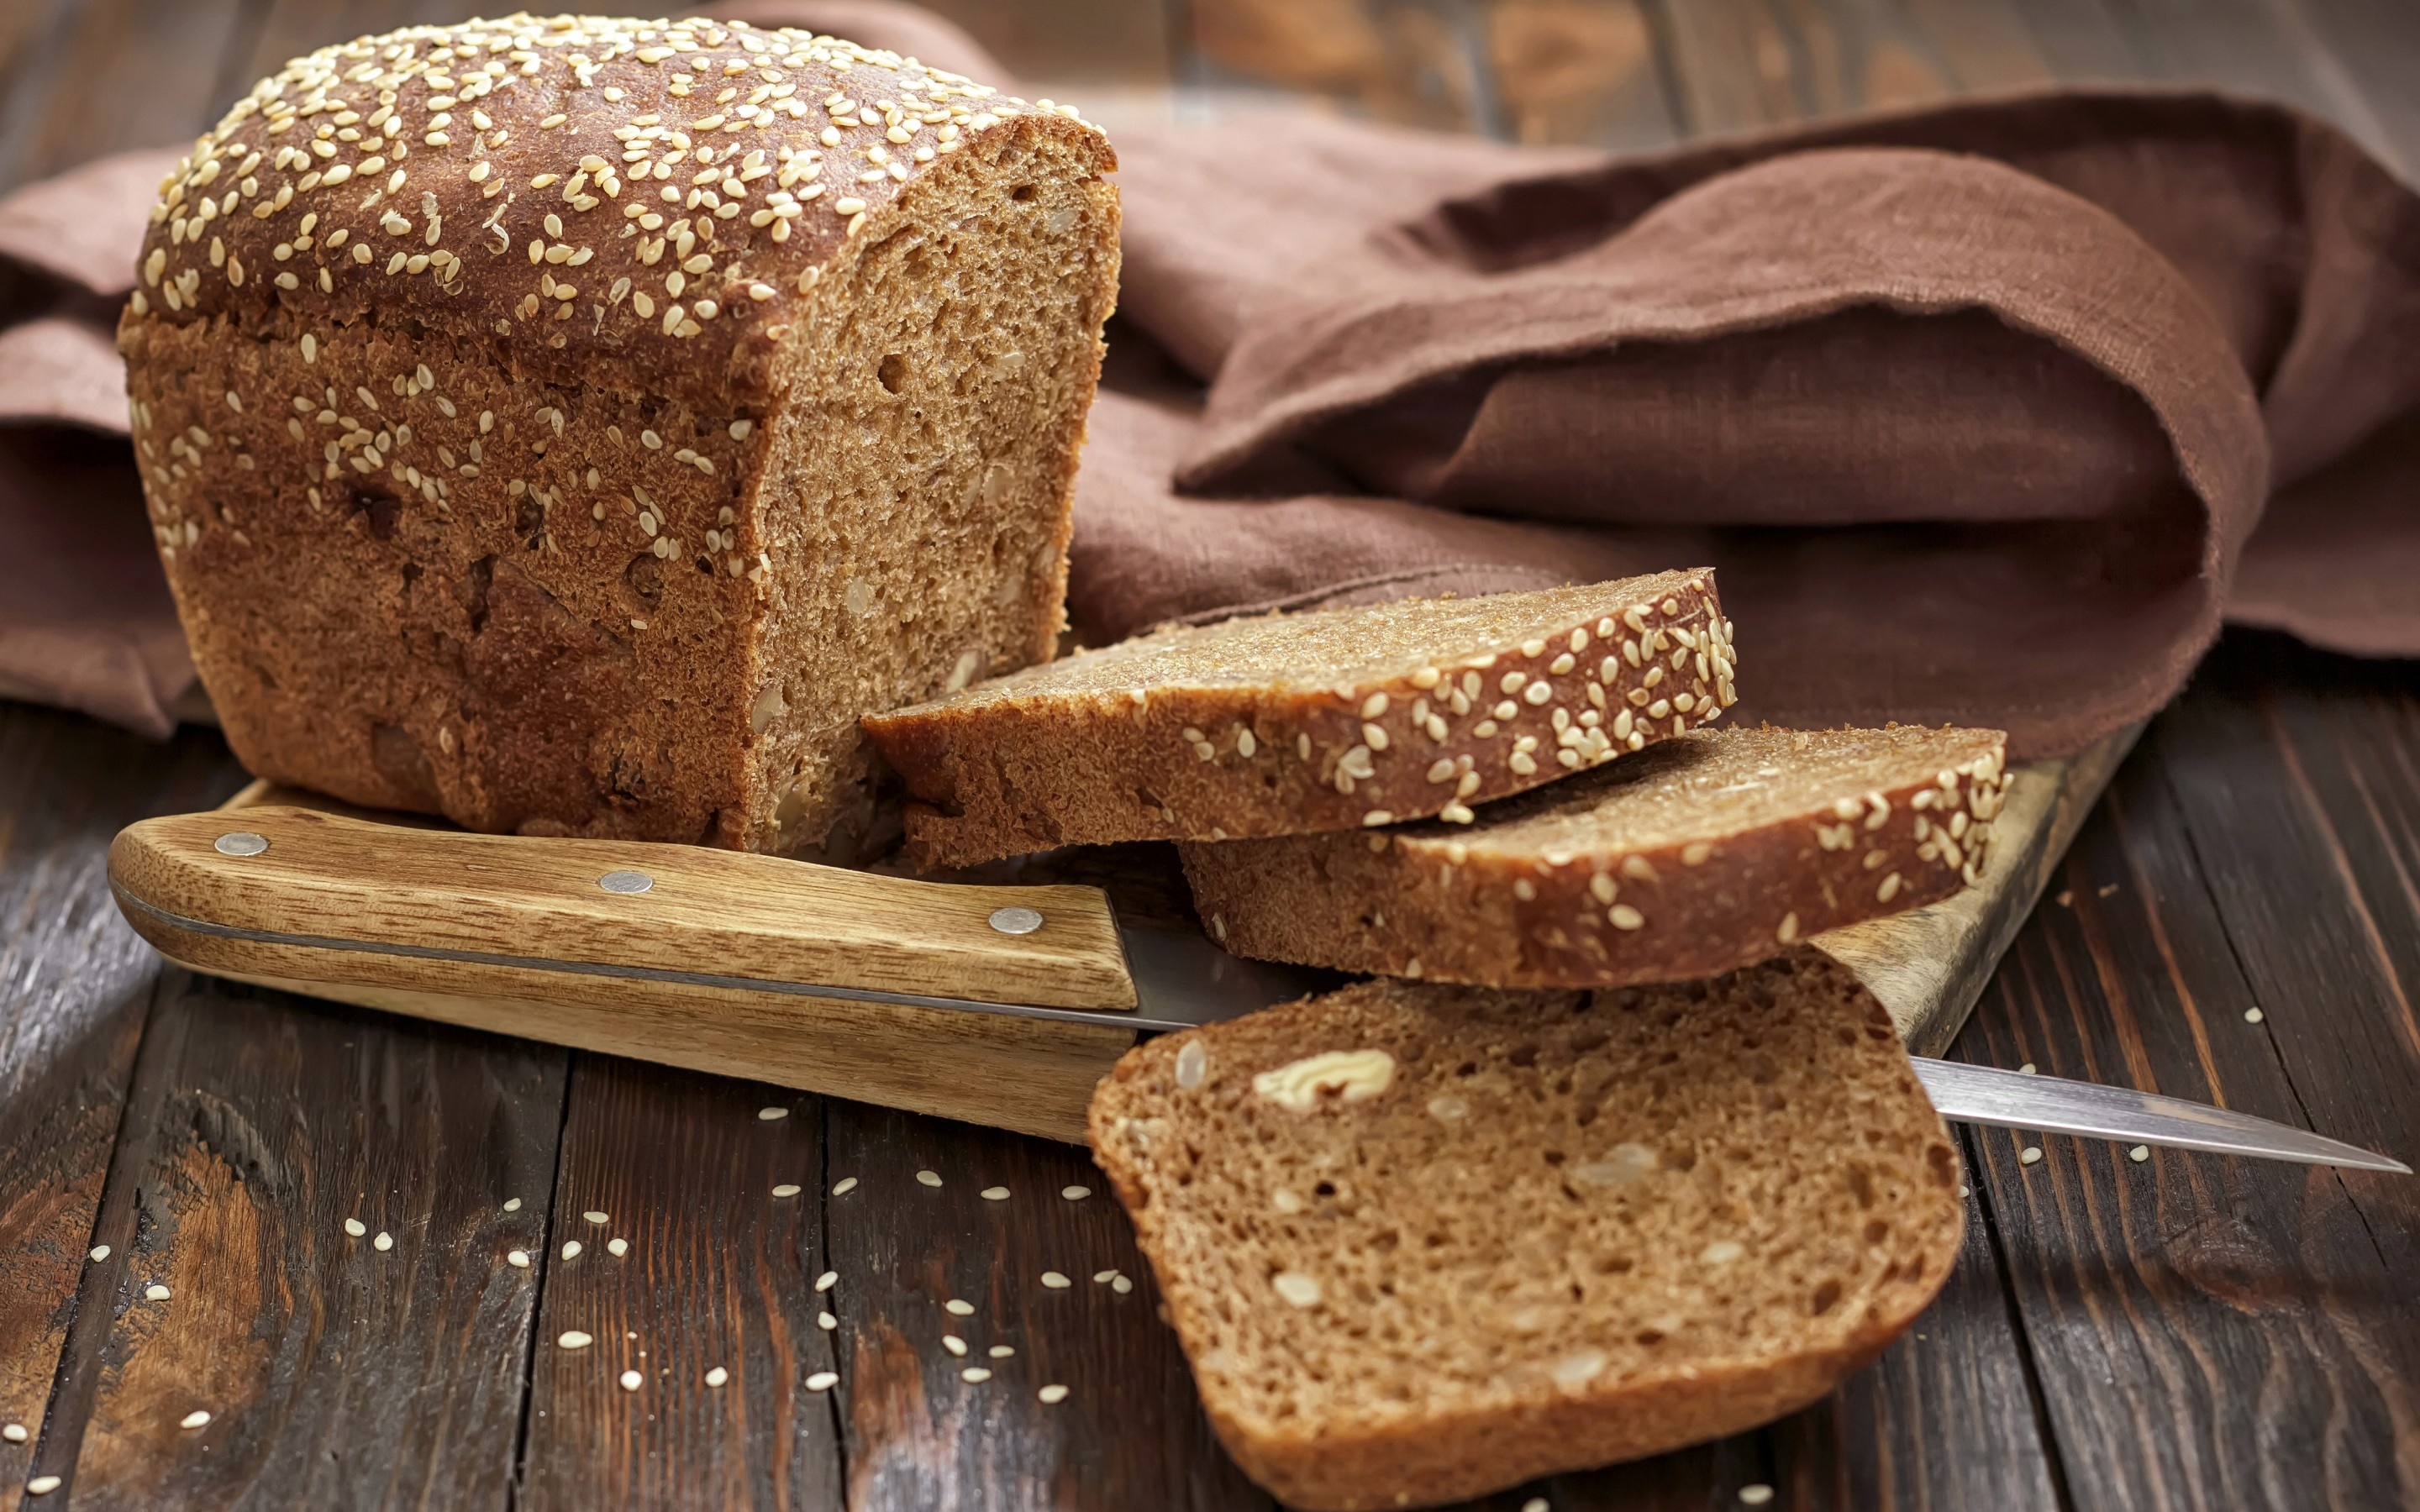 Freshly baked loaf, Warm crusty bread, Delicious aroma, Sliced perfection, 2880x1800 HD Desktop